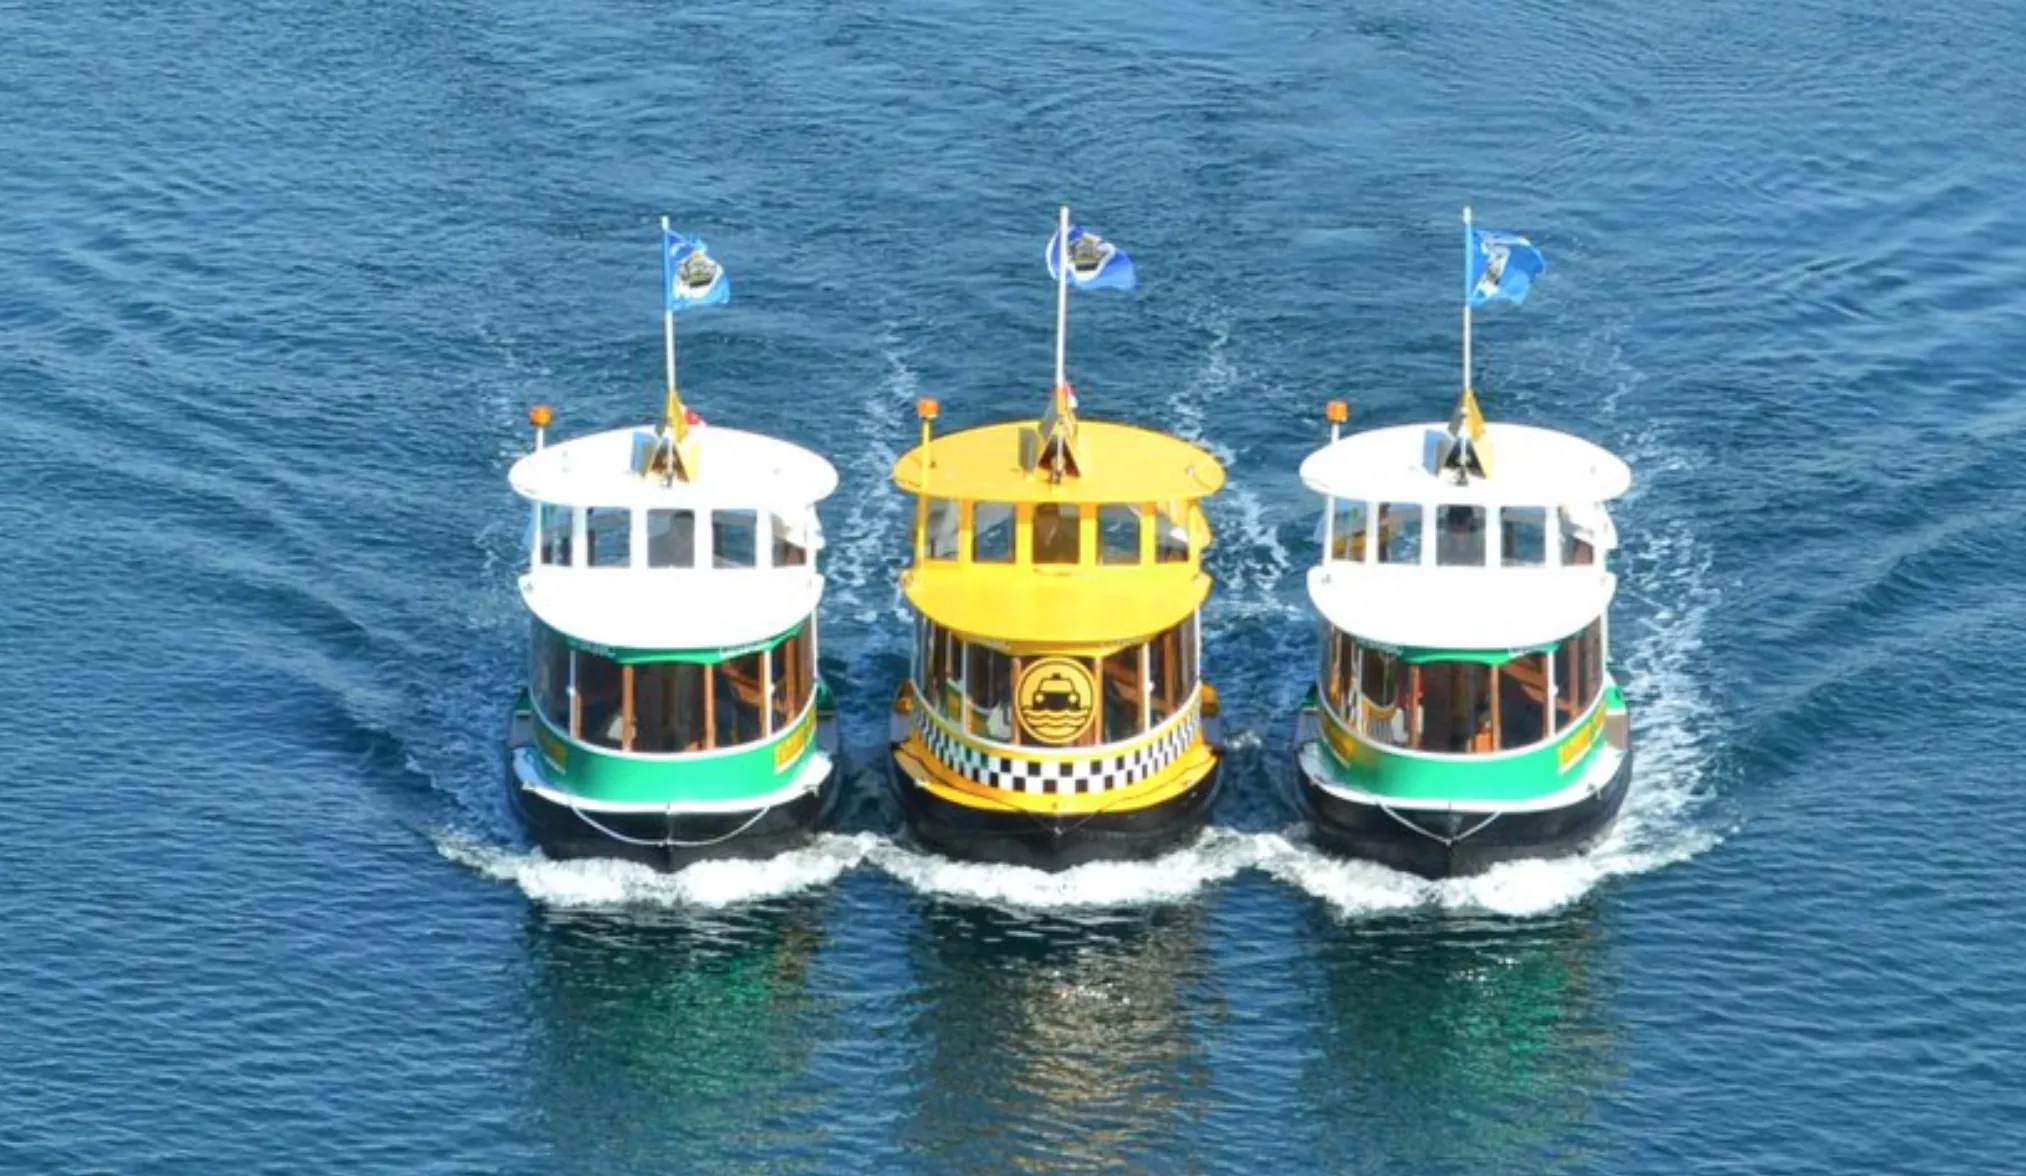 Victoria Harbour Ferry in Canada, North America | Excursions - Rated 3.6